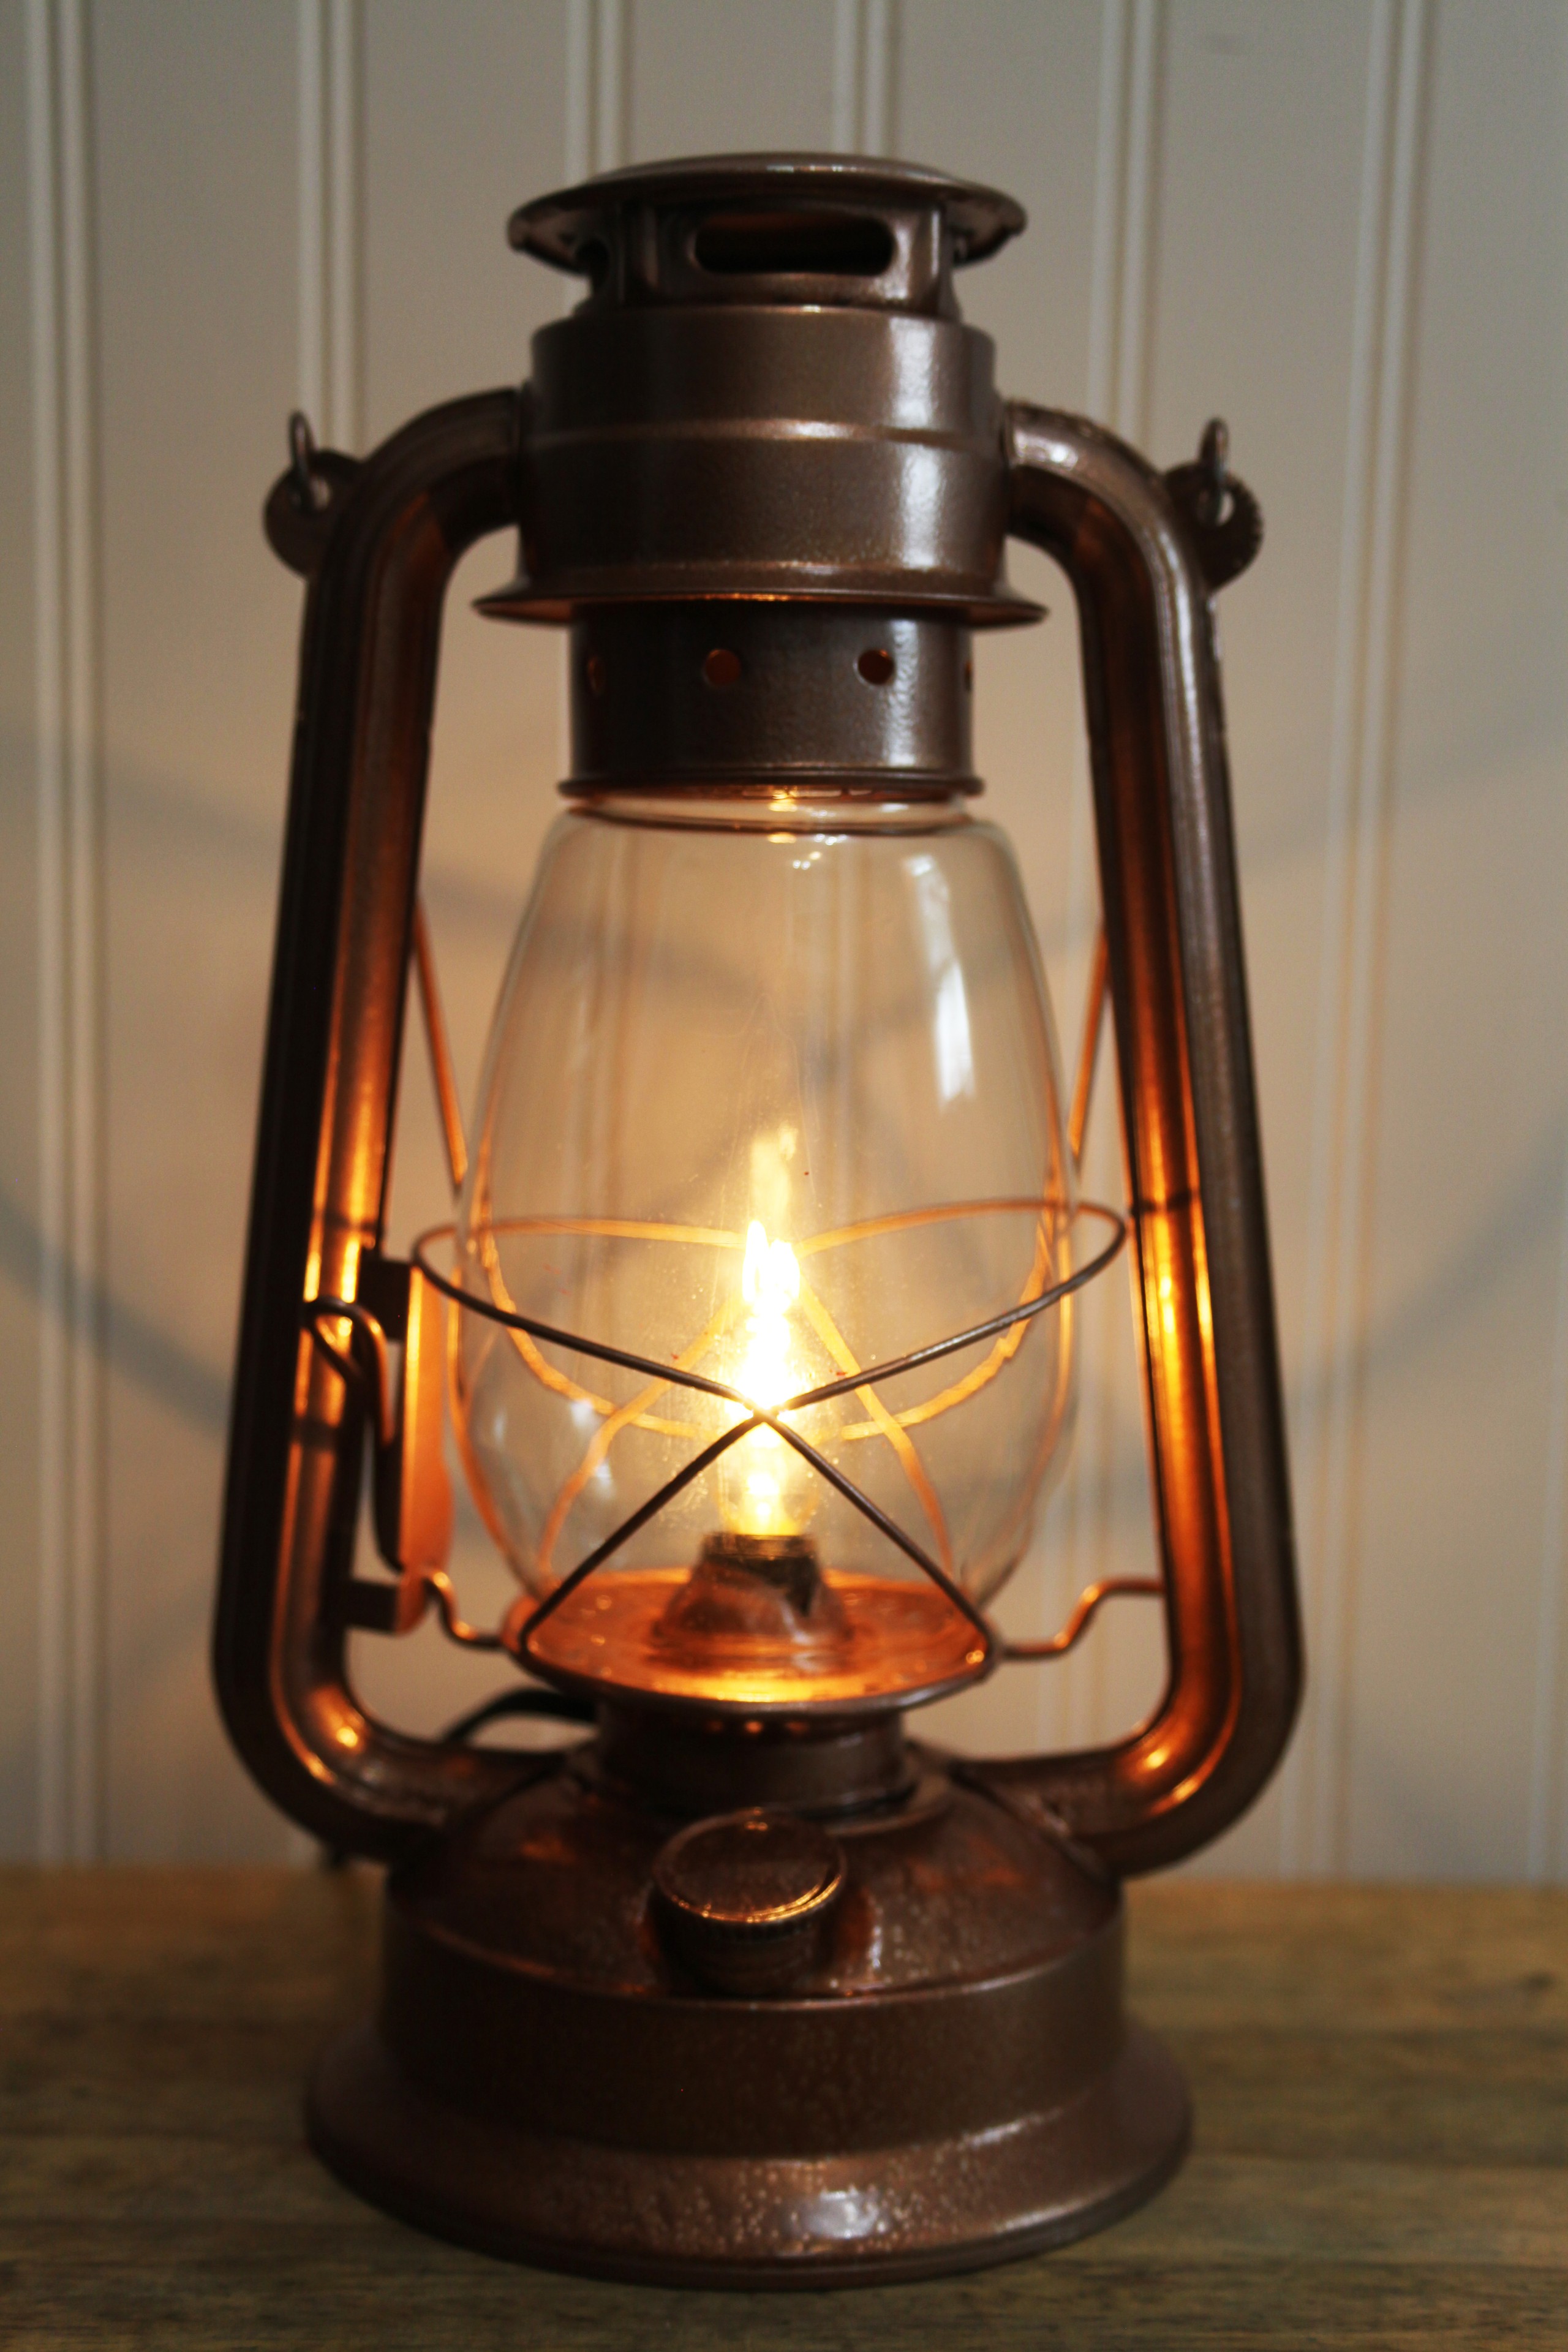 Electric lantern table lamp copper finish dimmer switch